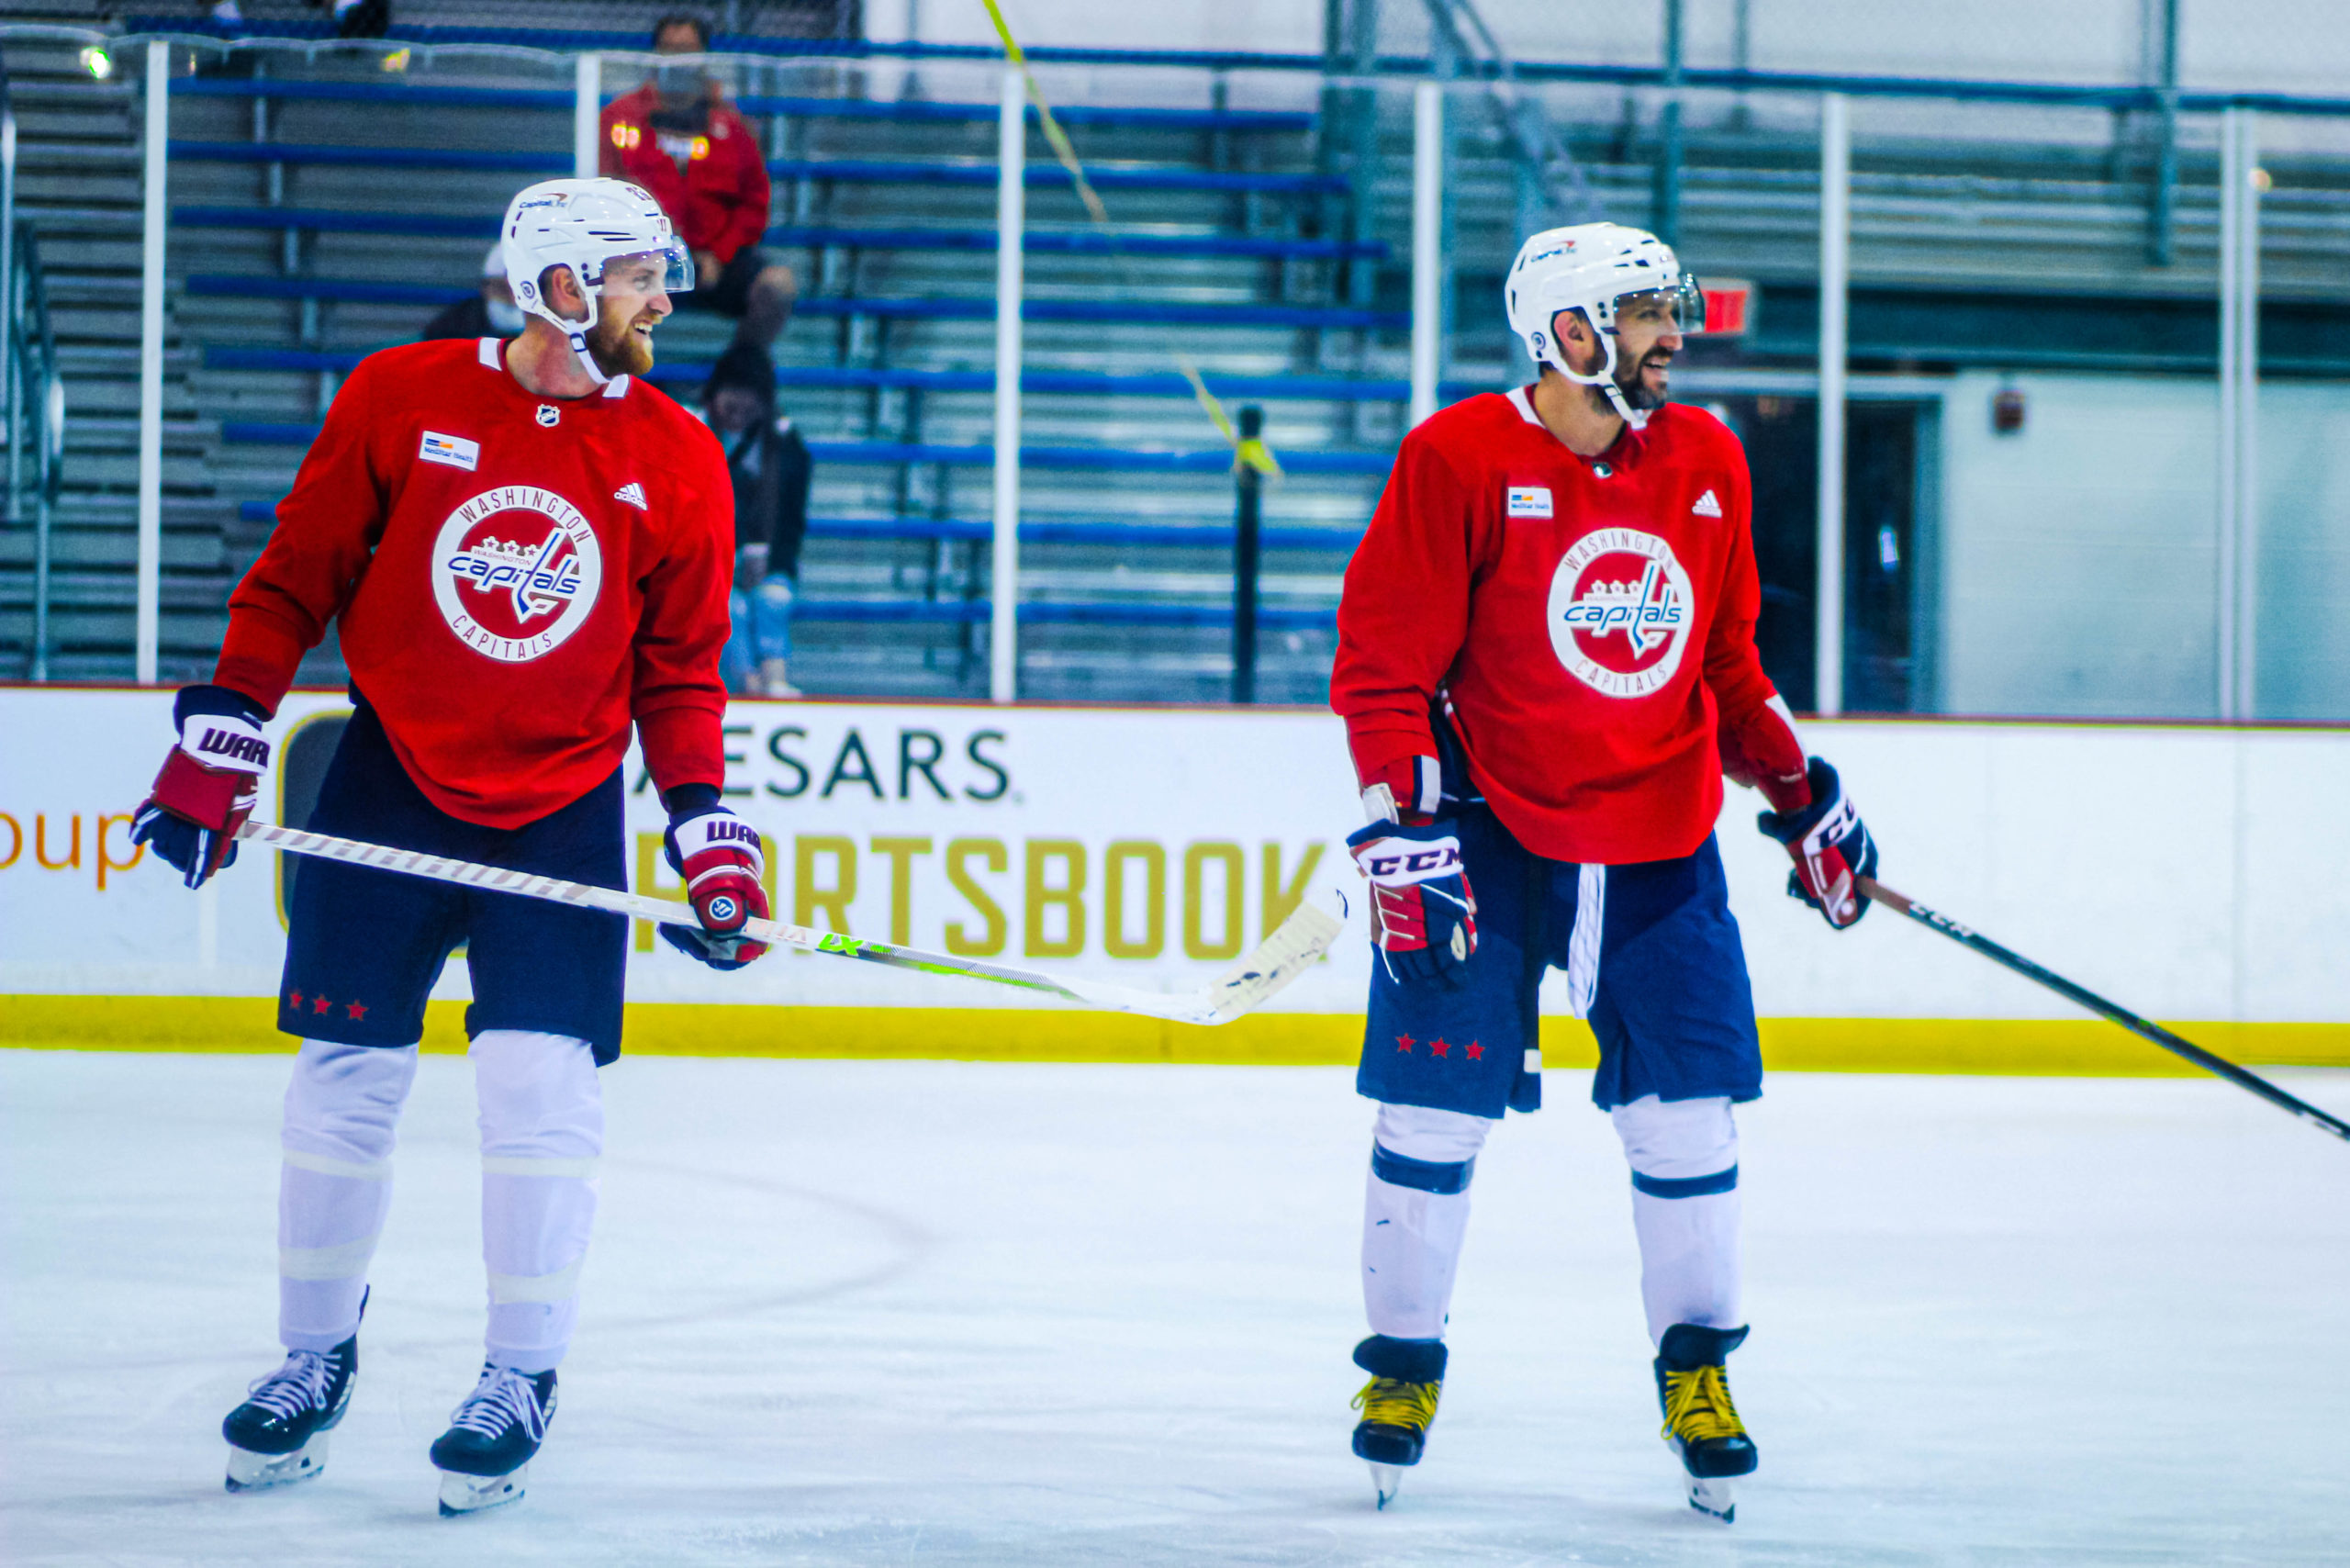 Capitals forwards Alex Ovechkin and Anthony Mantha